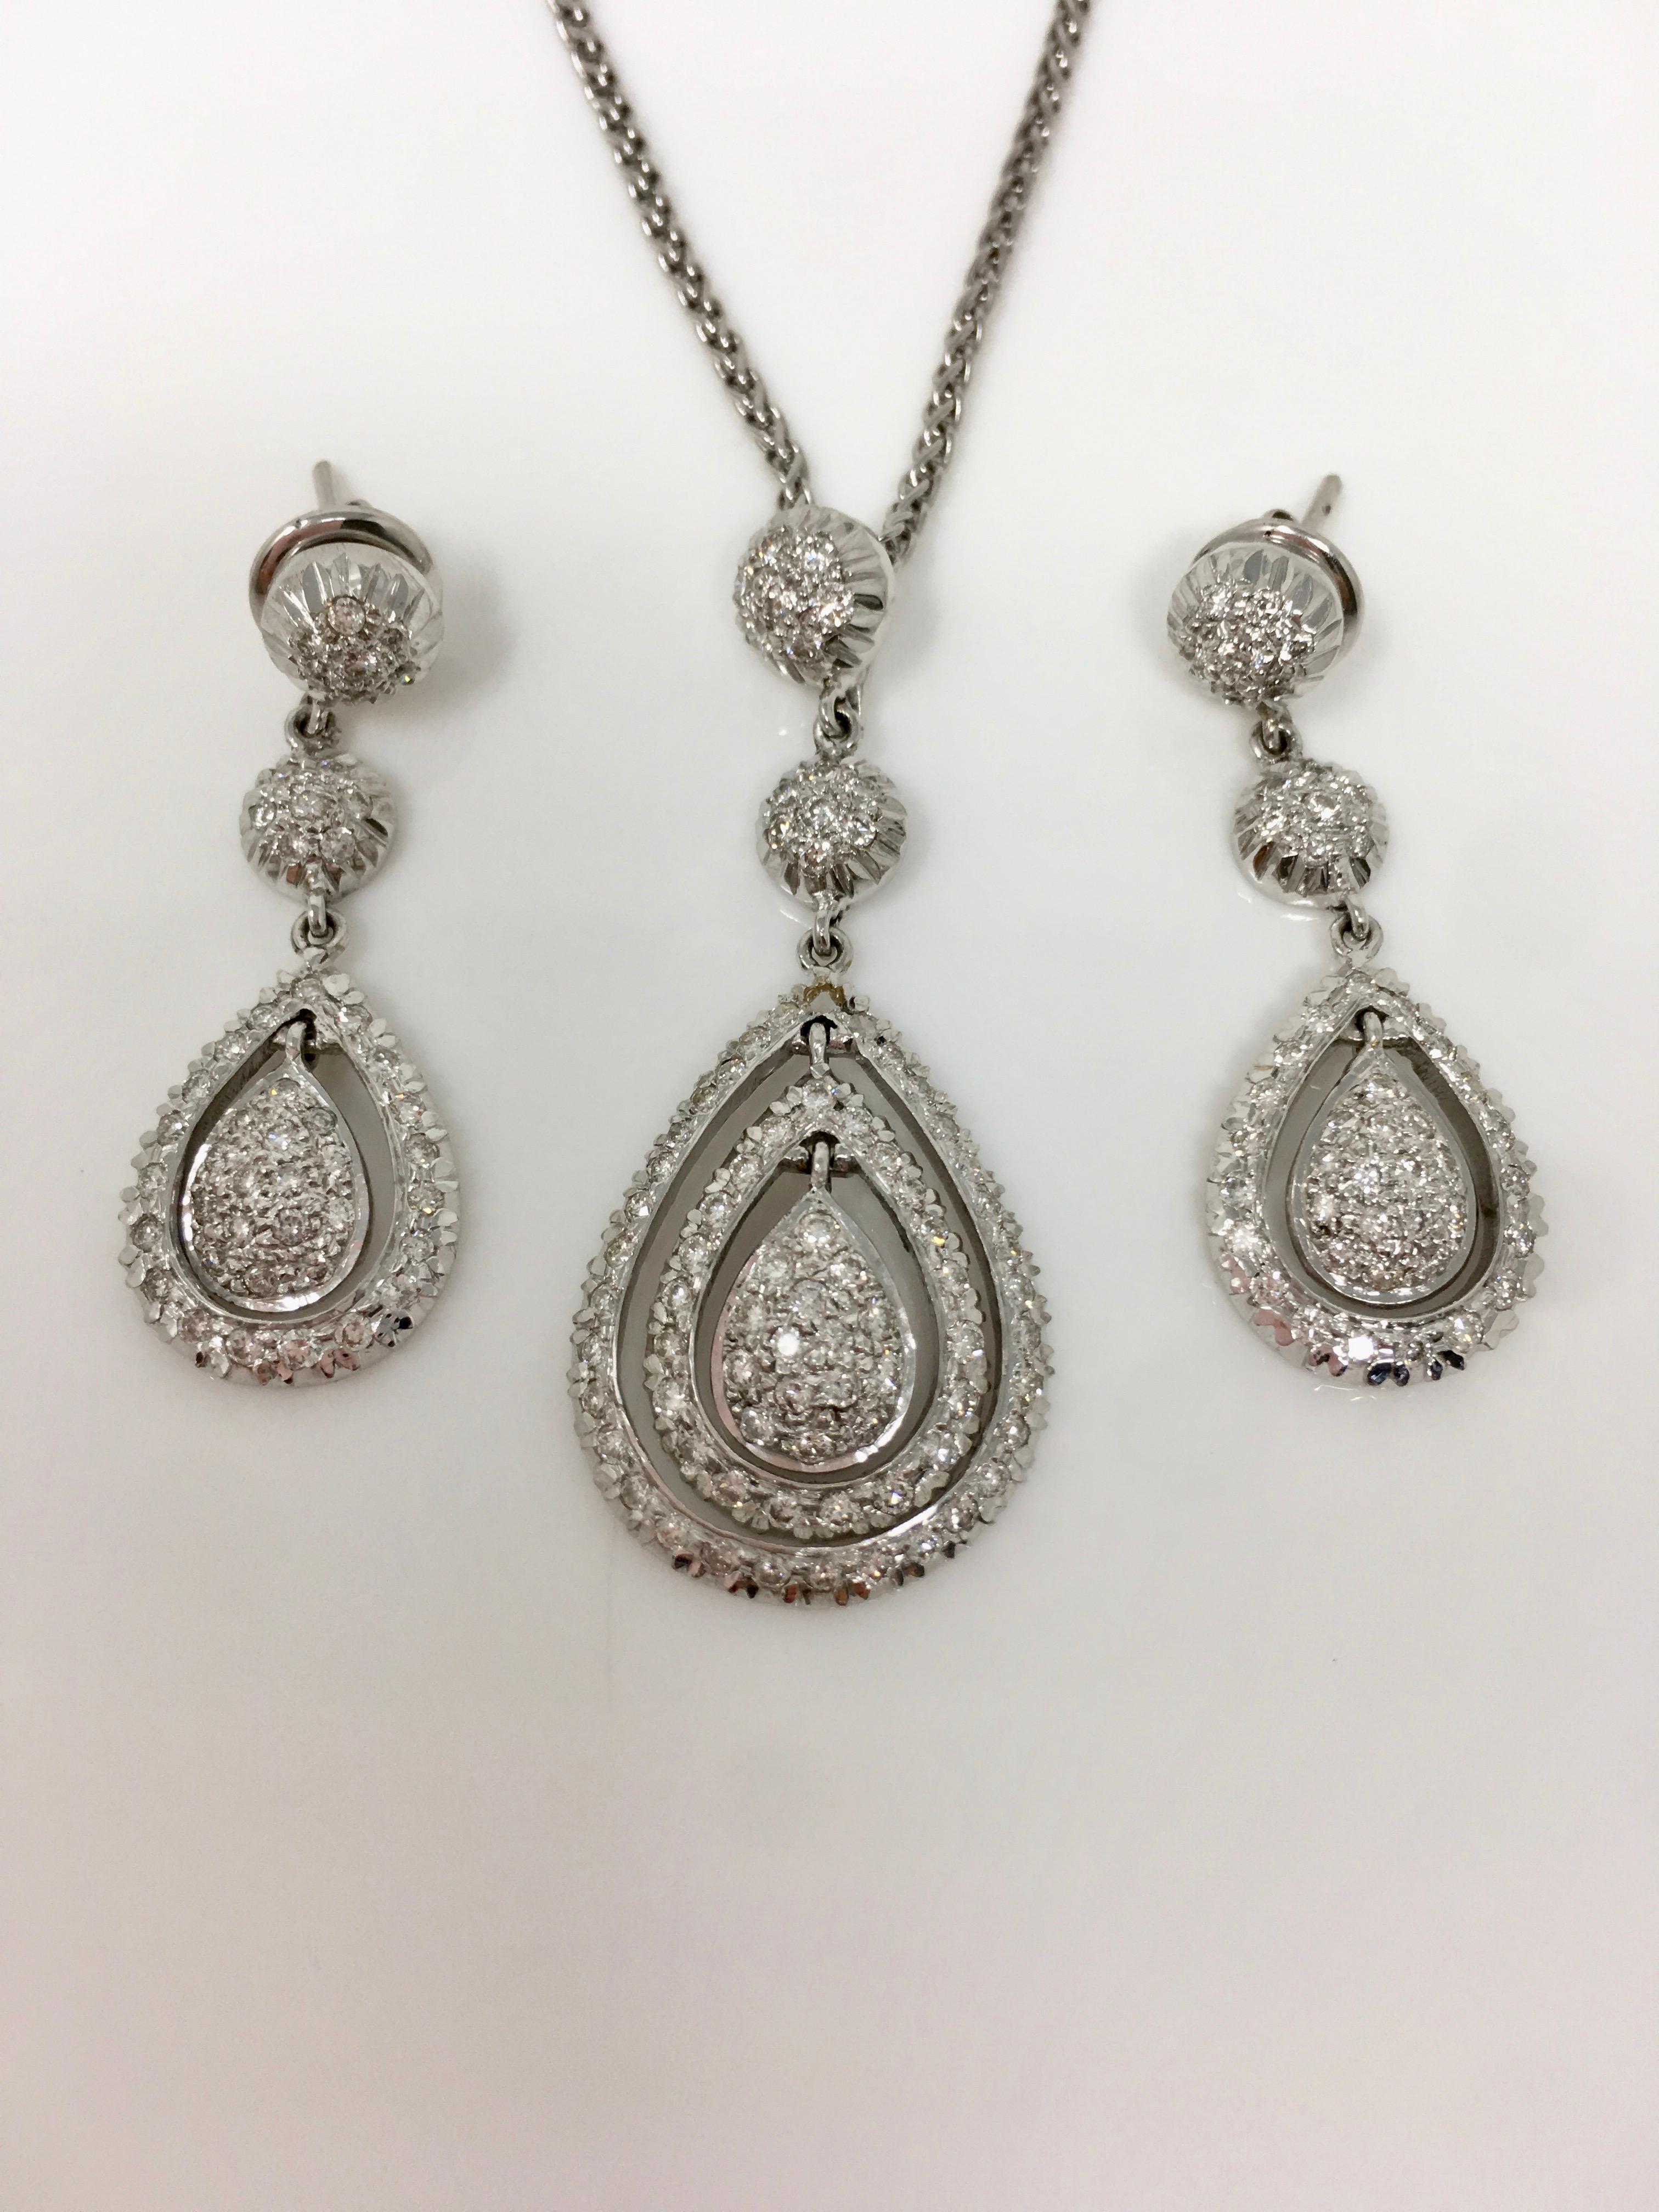 matching diamond earrings and necklace